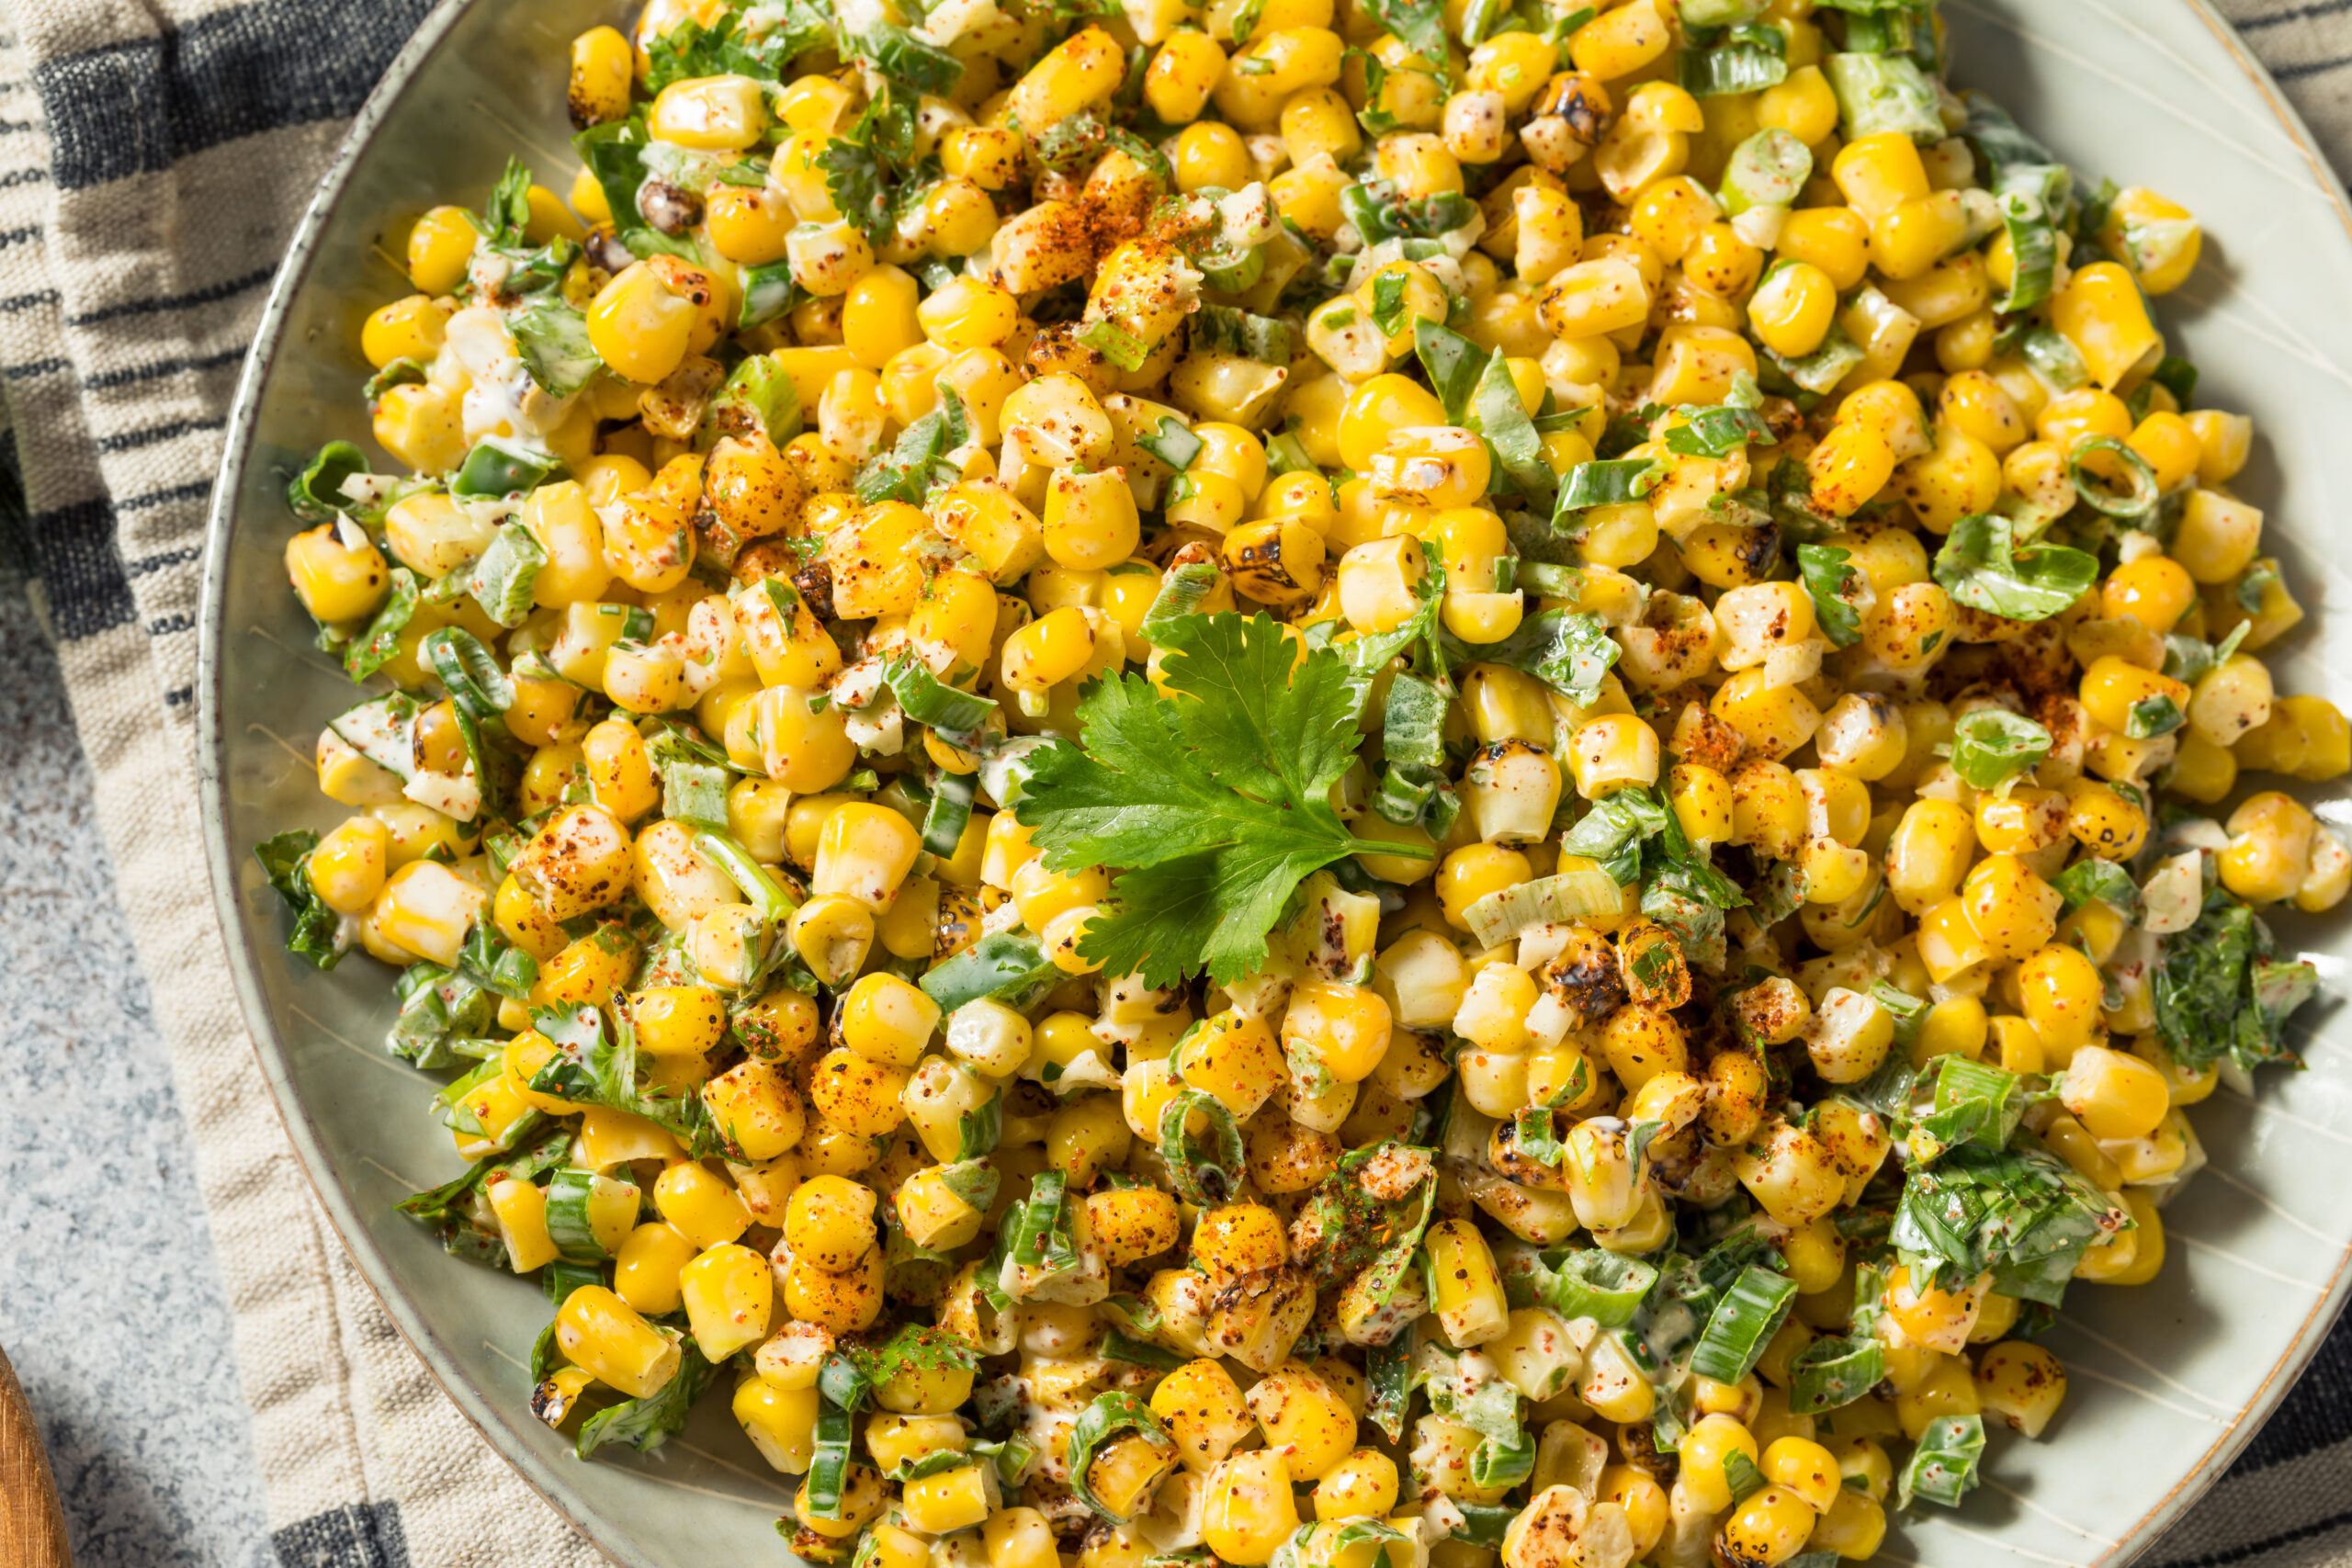 Mexican Street Corn Salad Recipe (Esquites with Lime); Looking for a tangy and flavorful salad recipe? Try my Mexican Street Corn Salad (Esquites) with Lime! This twist on a classic Mexican street food features charred corn kernels tossed in a creamy and zesty dressing. Perfect as a side dish or a standalone vegetarian option. Get the recipe now!